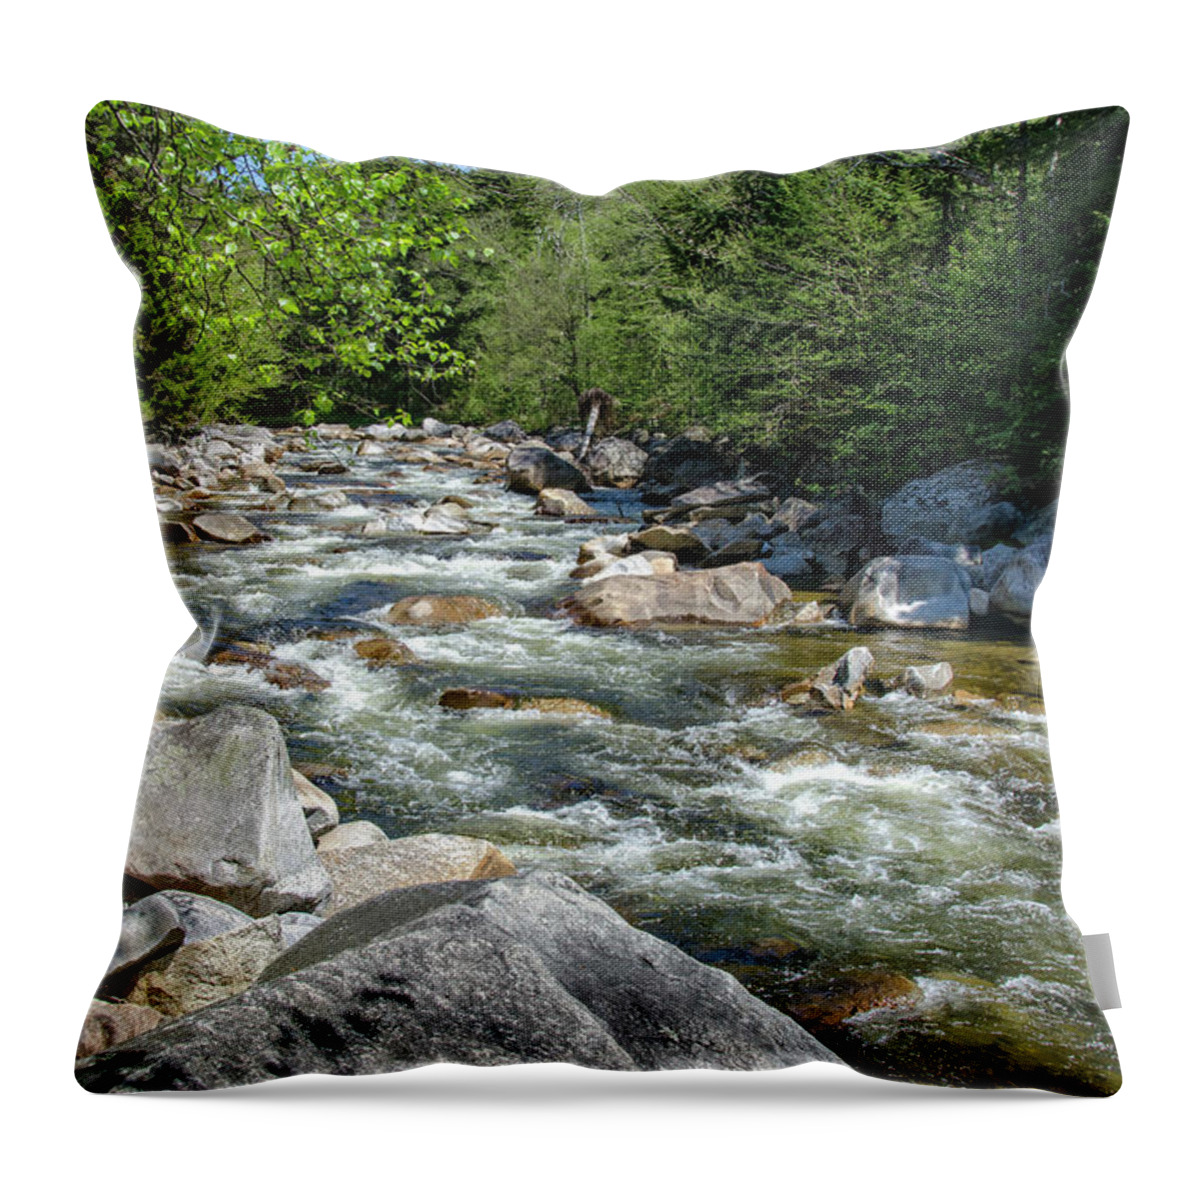 Spring Throw Pillow featuring the photograph Spring Stream by Donna Doherty